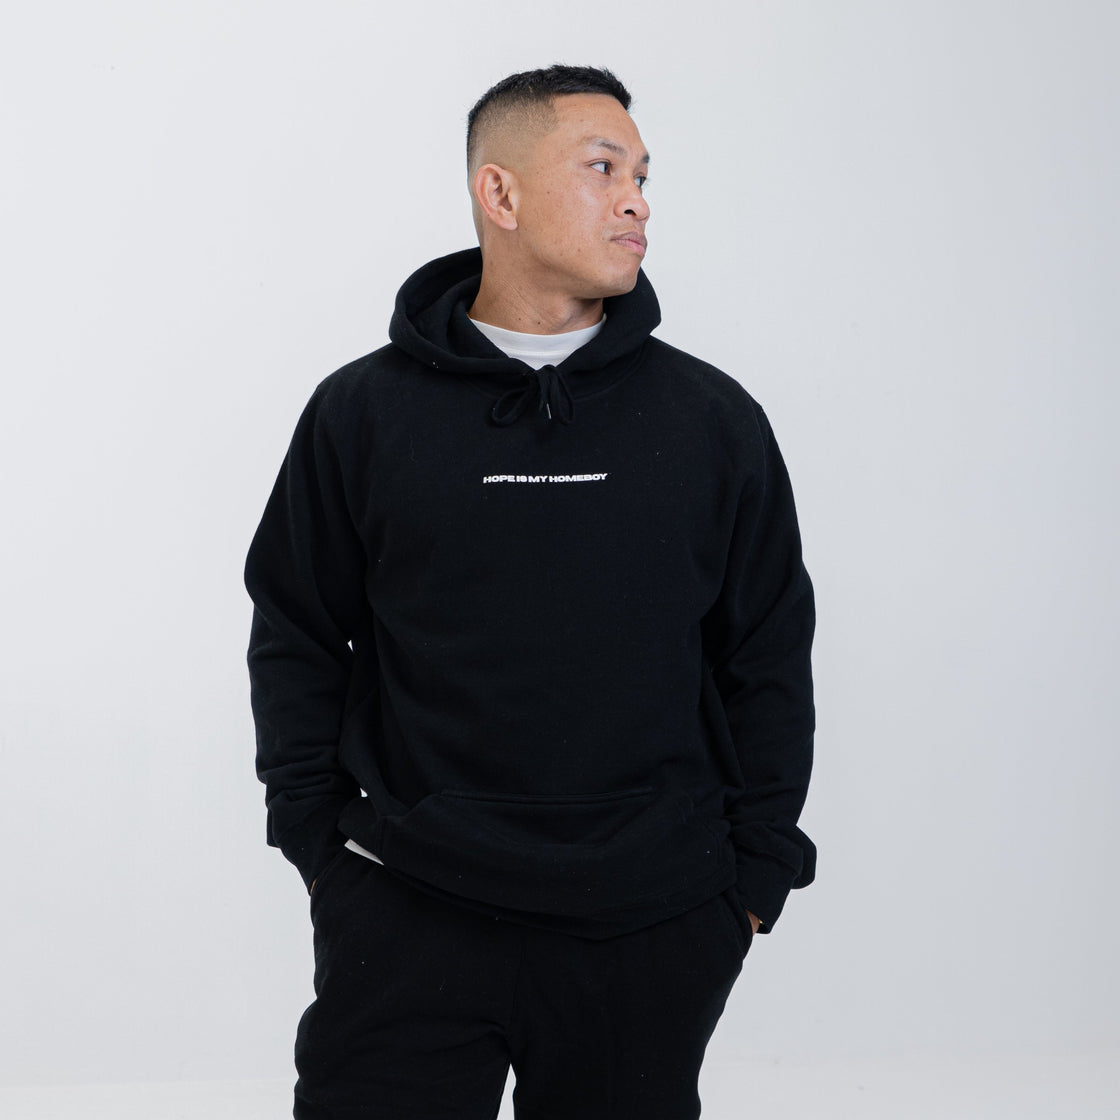 Check On Your Homies Classic Hoodie | Men's